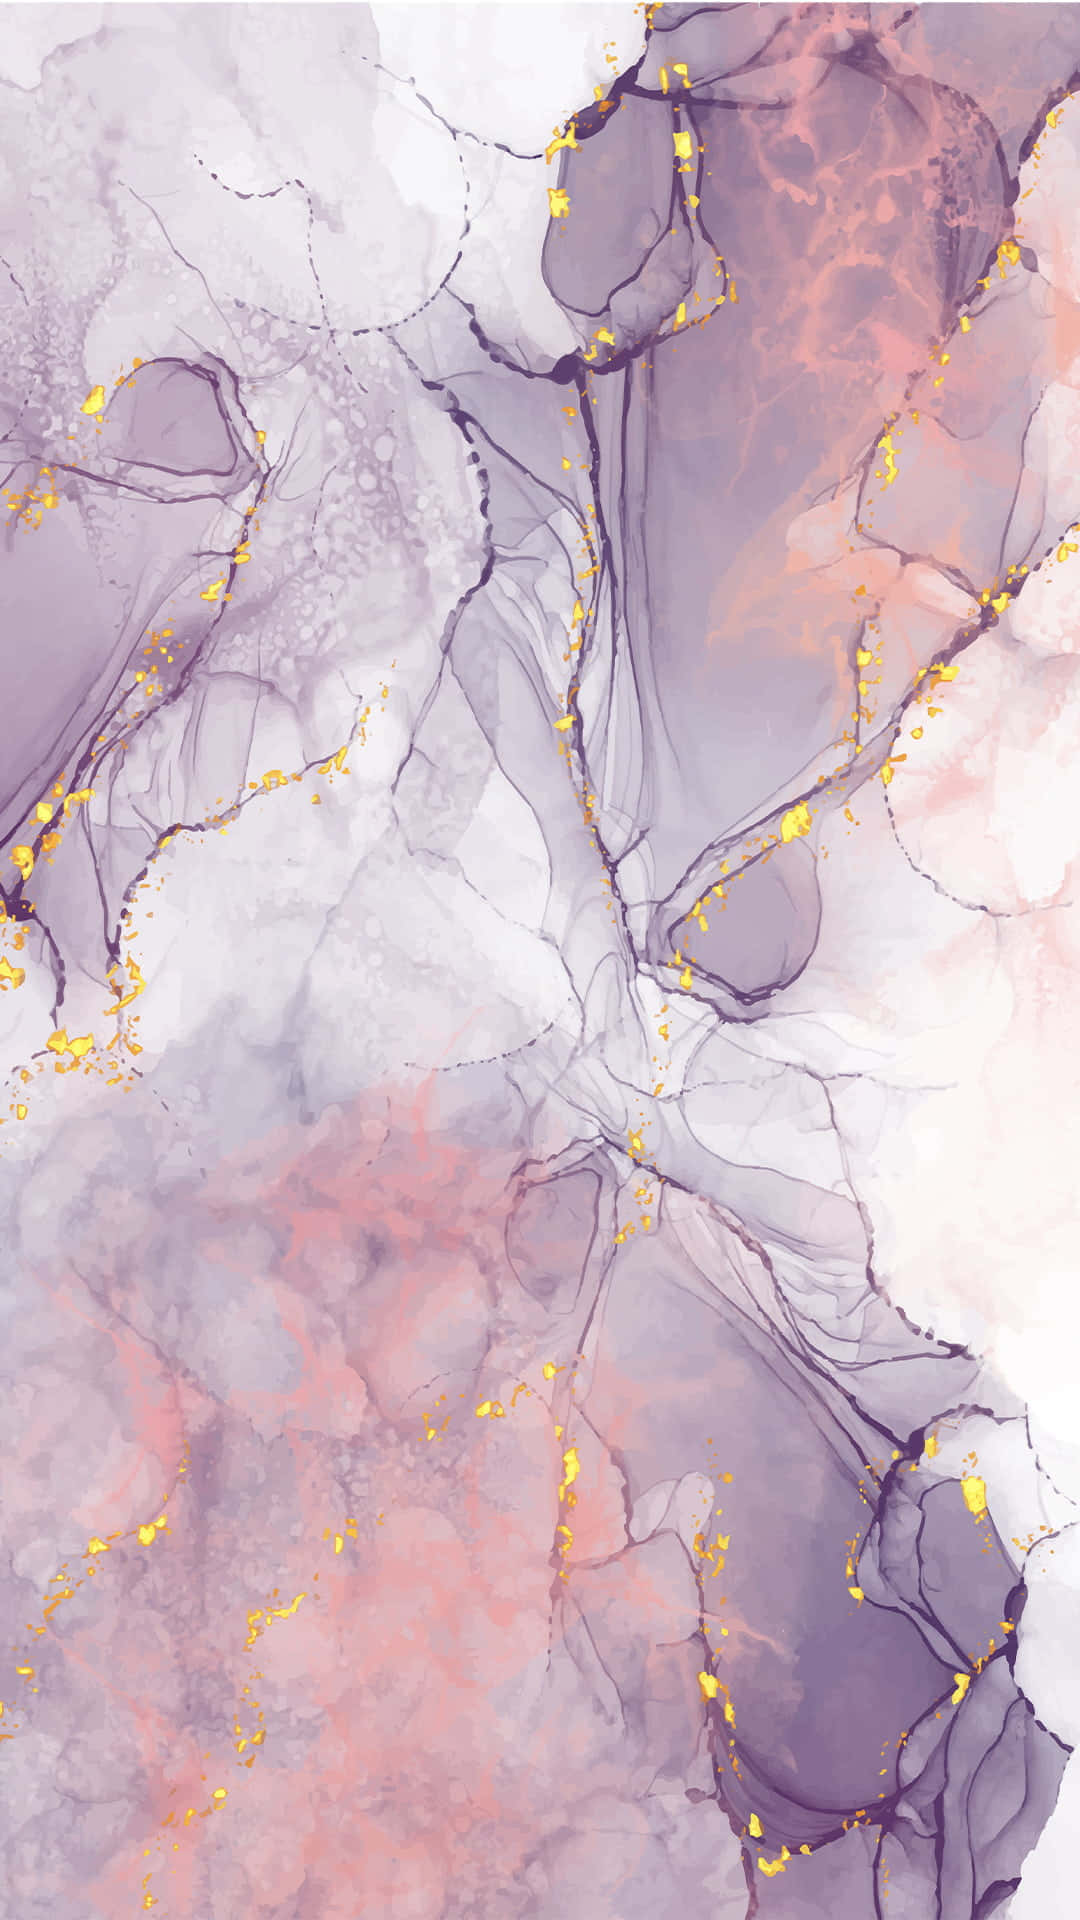 "Add a touch of glam with this beautiful glitter marble wallpaper." Wallpaper